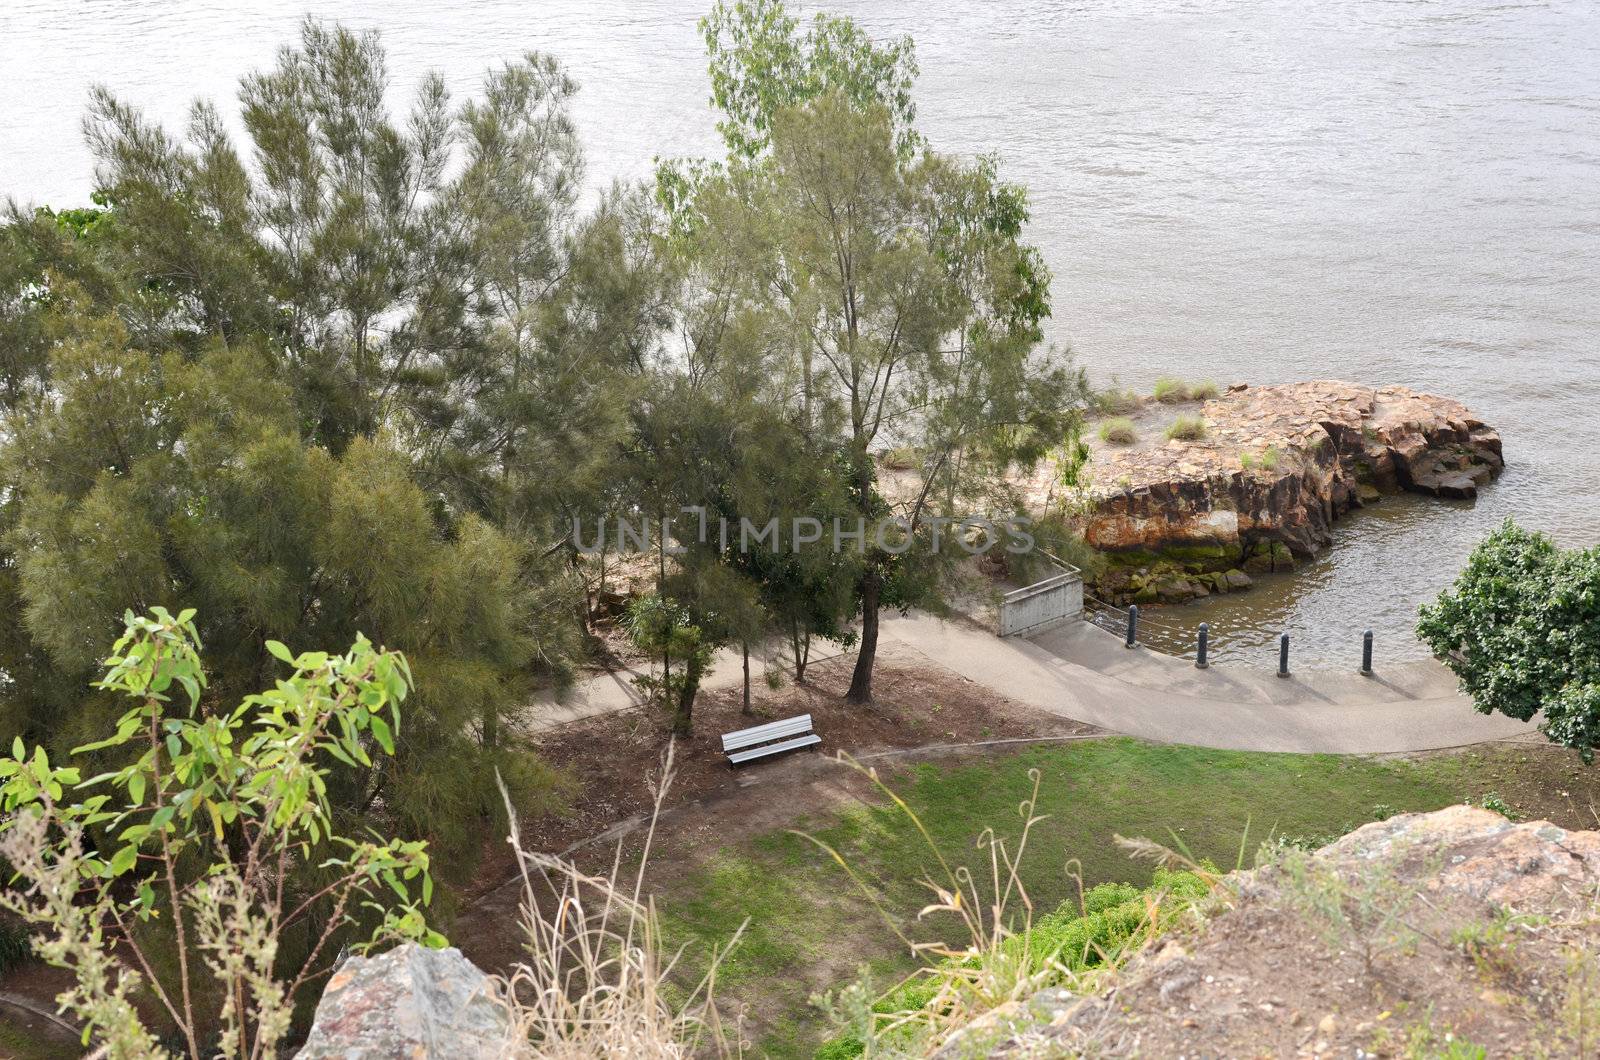 Rocky outcrop on the south bank  walkway beside the Brisbane river. Photo taken from the top of the Kangaroo Point cliffs.